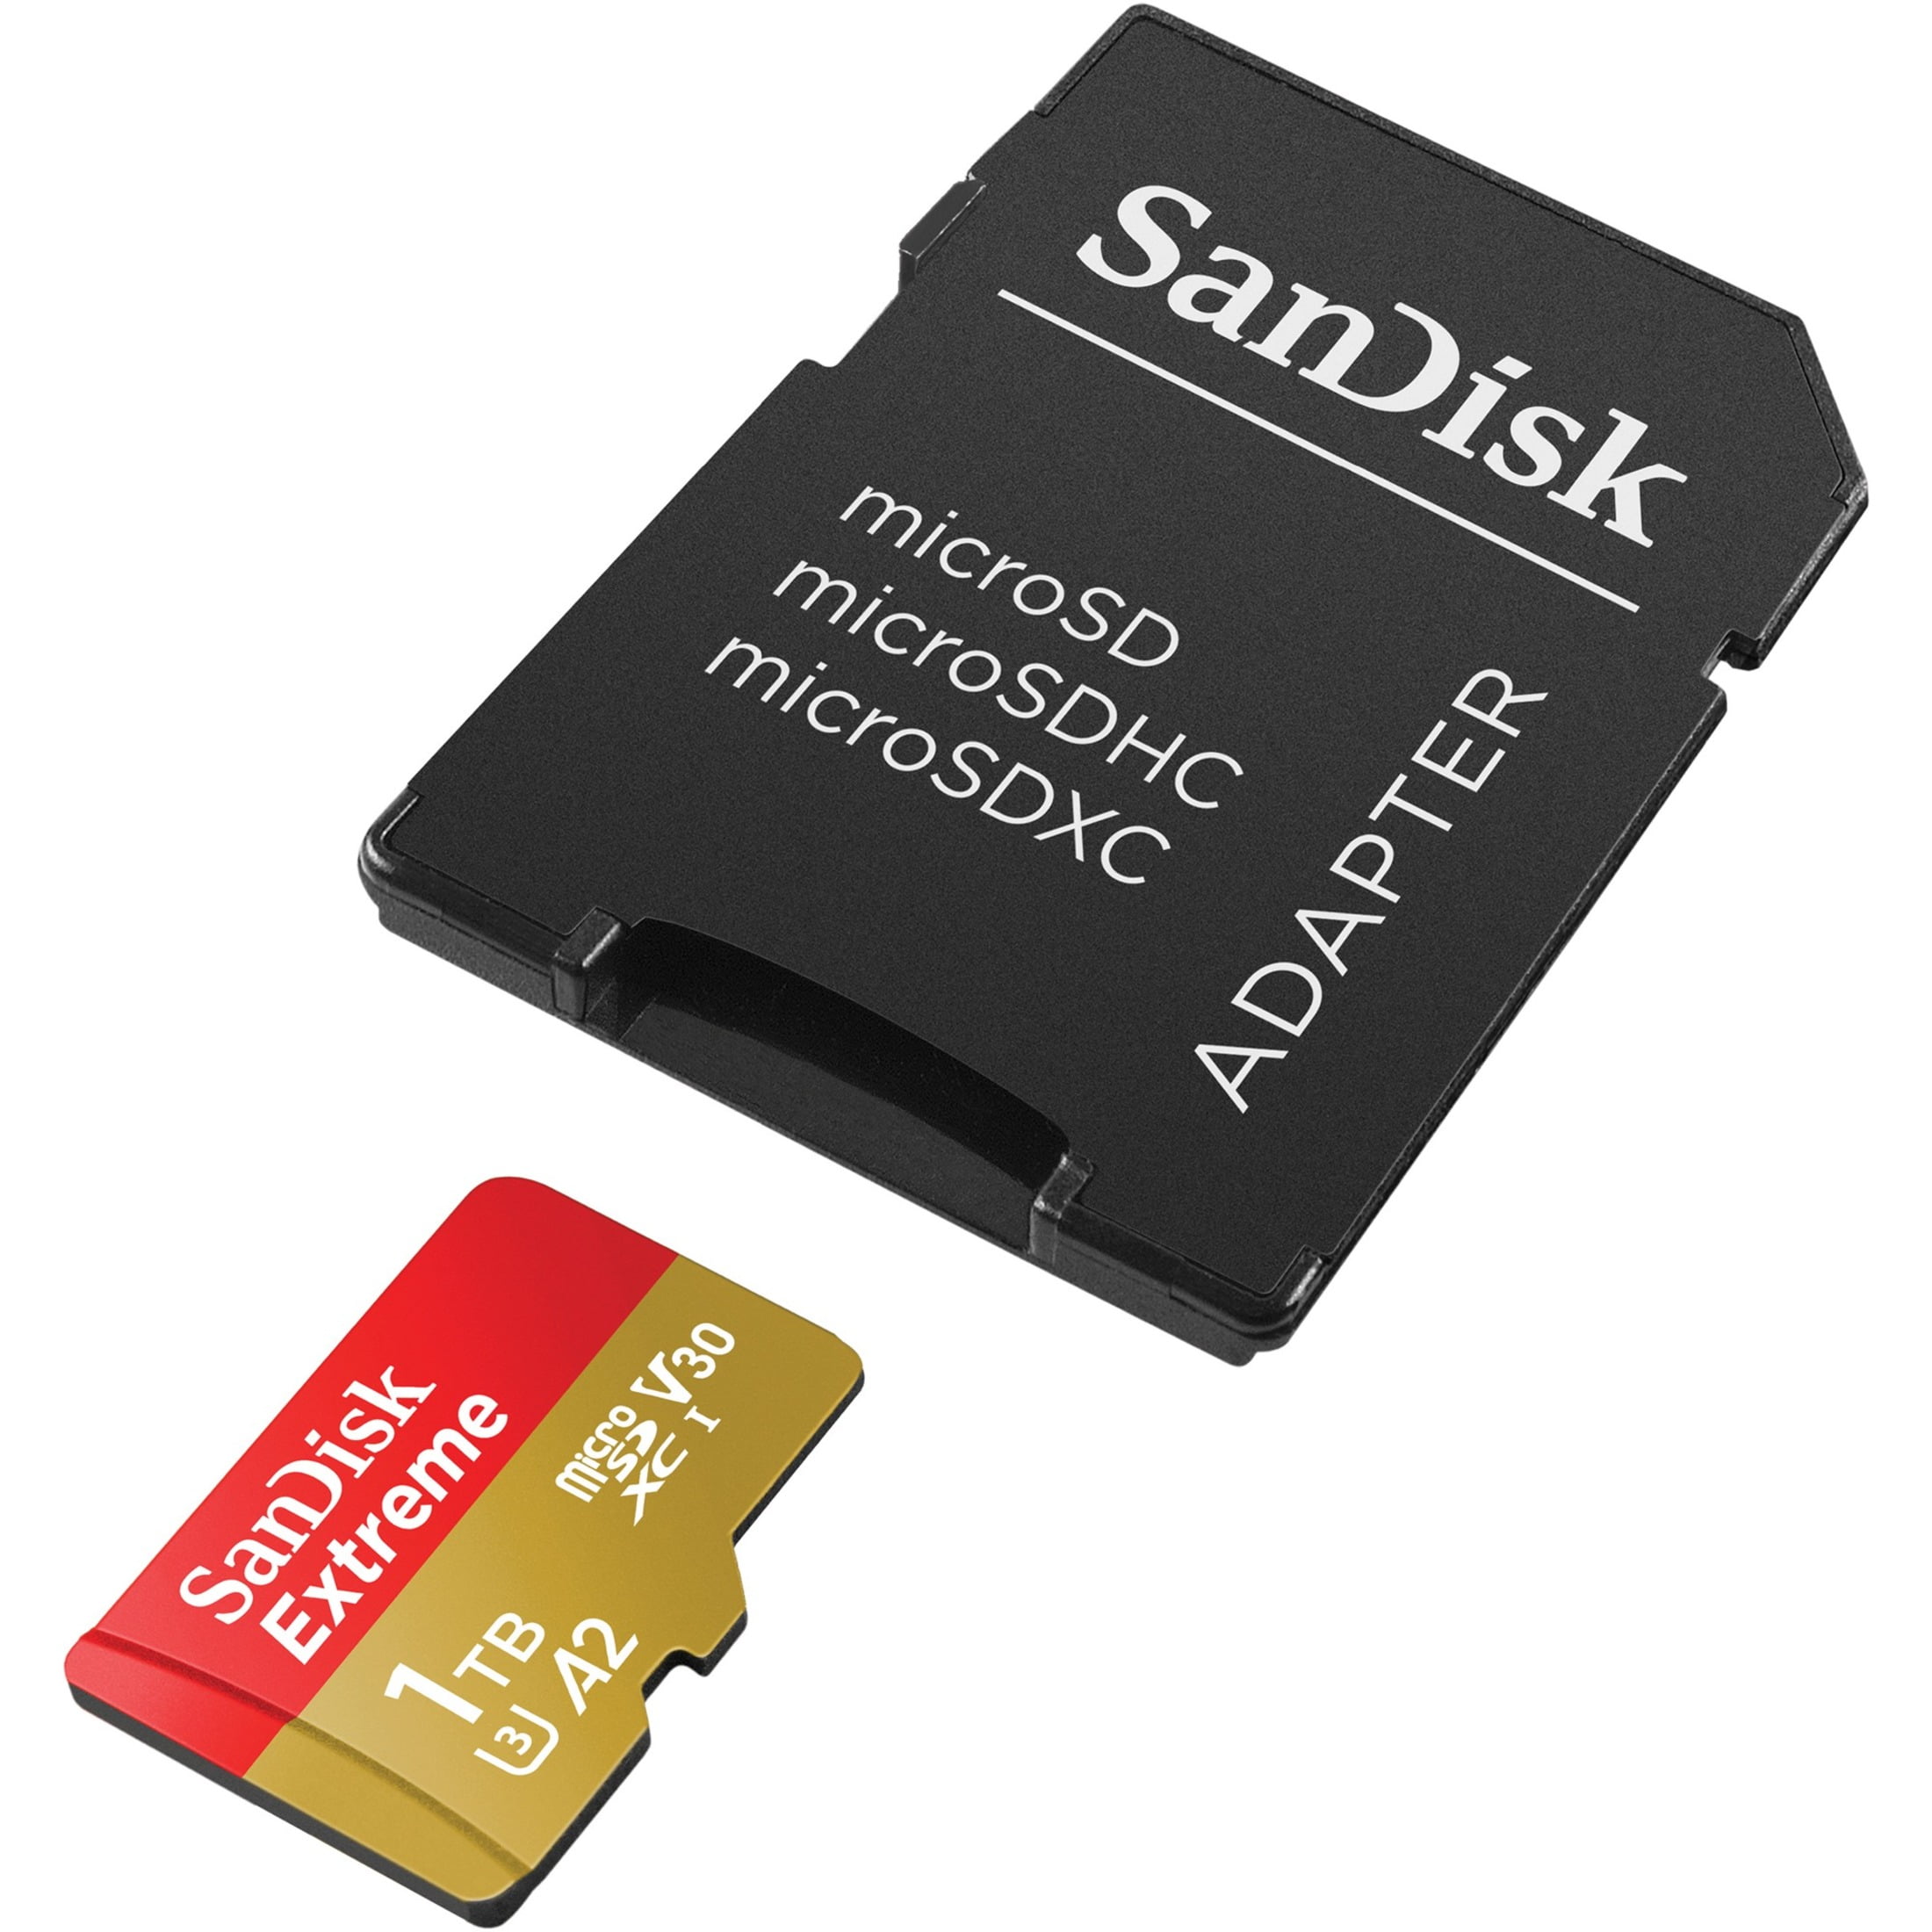 1TB Micro SD Card 1TB High Speed Class 10 Micro SDXC Card Memory SD Card with Adapter for Android Smartphones